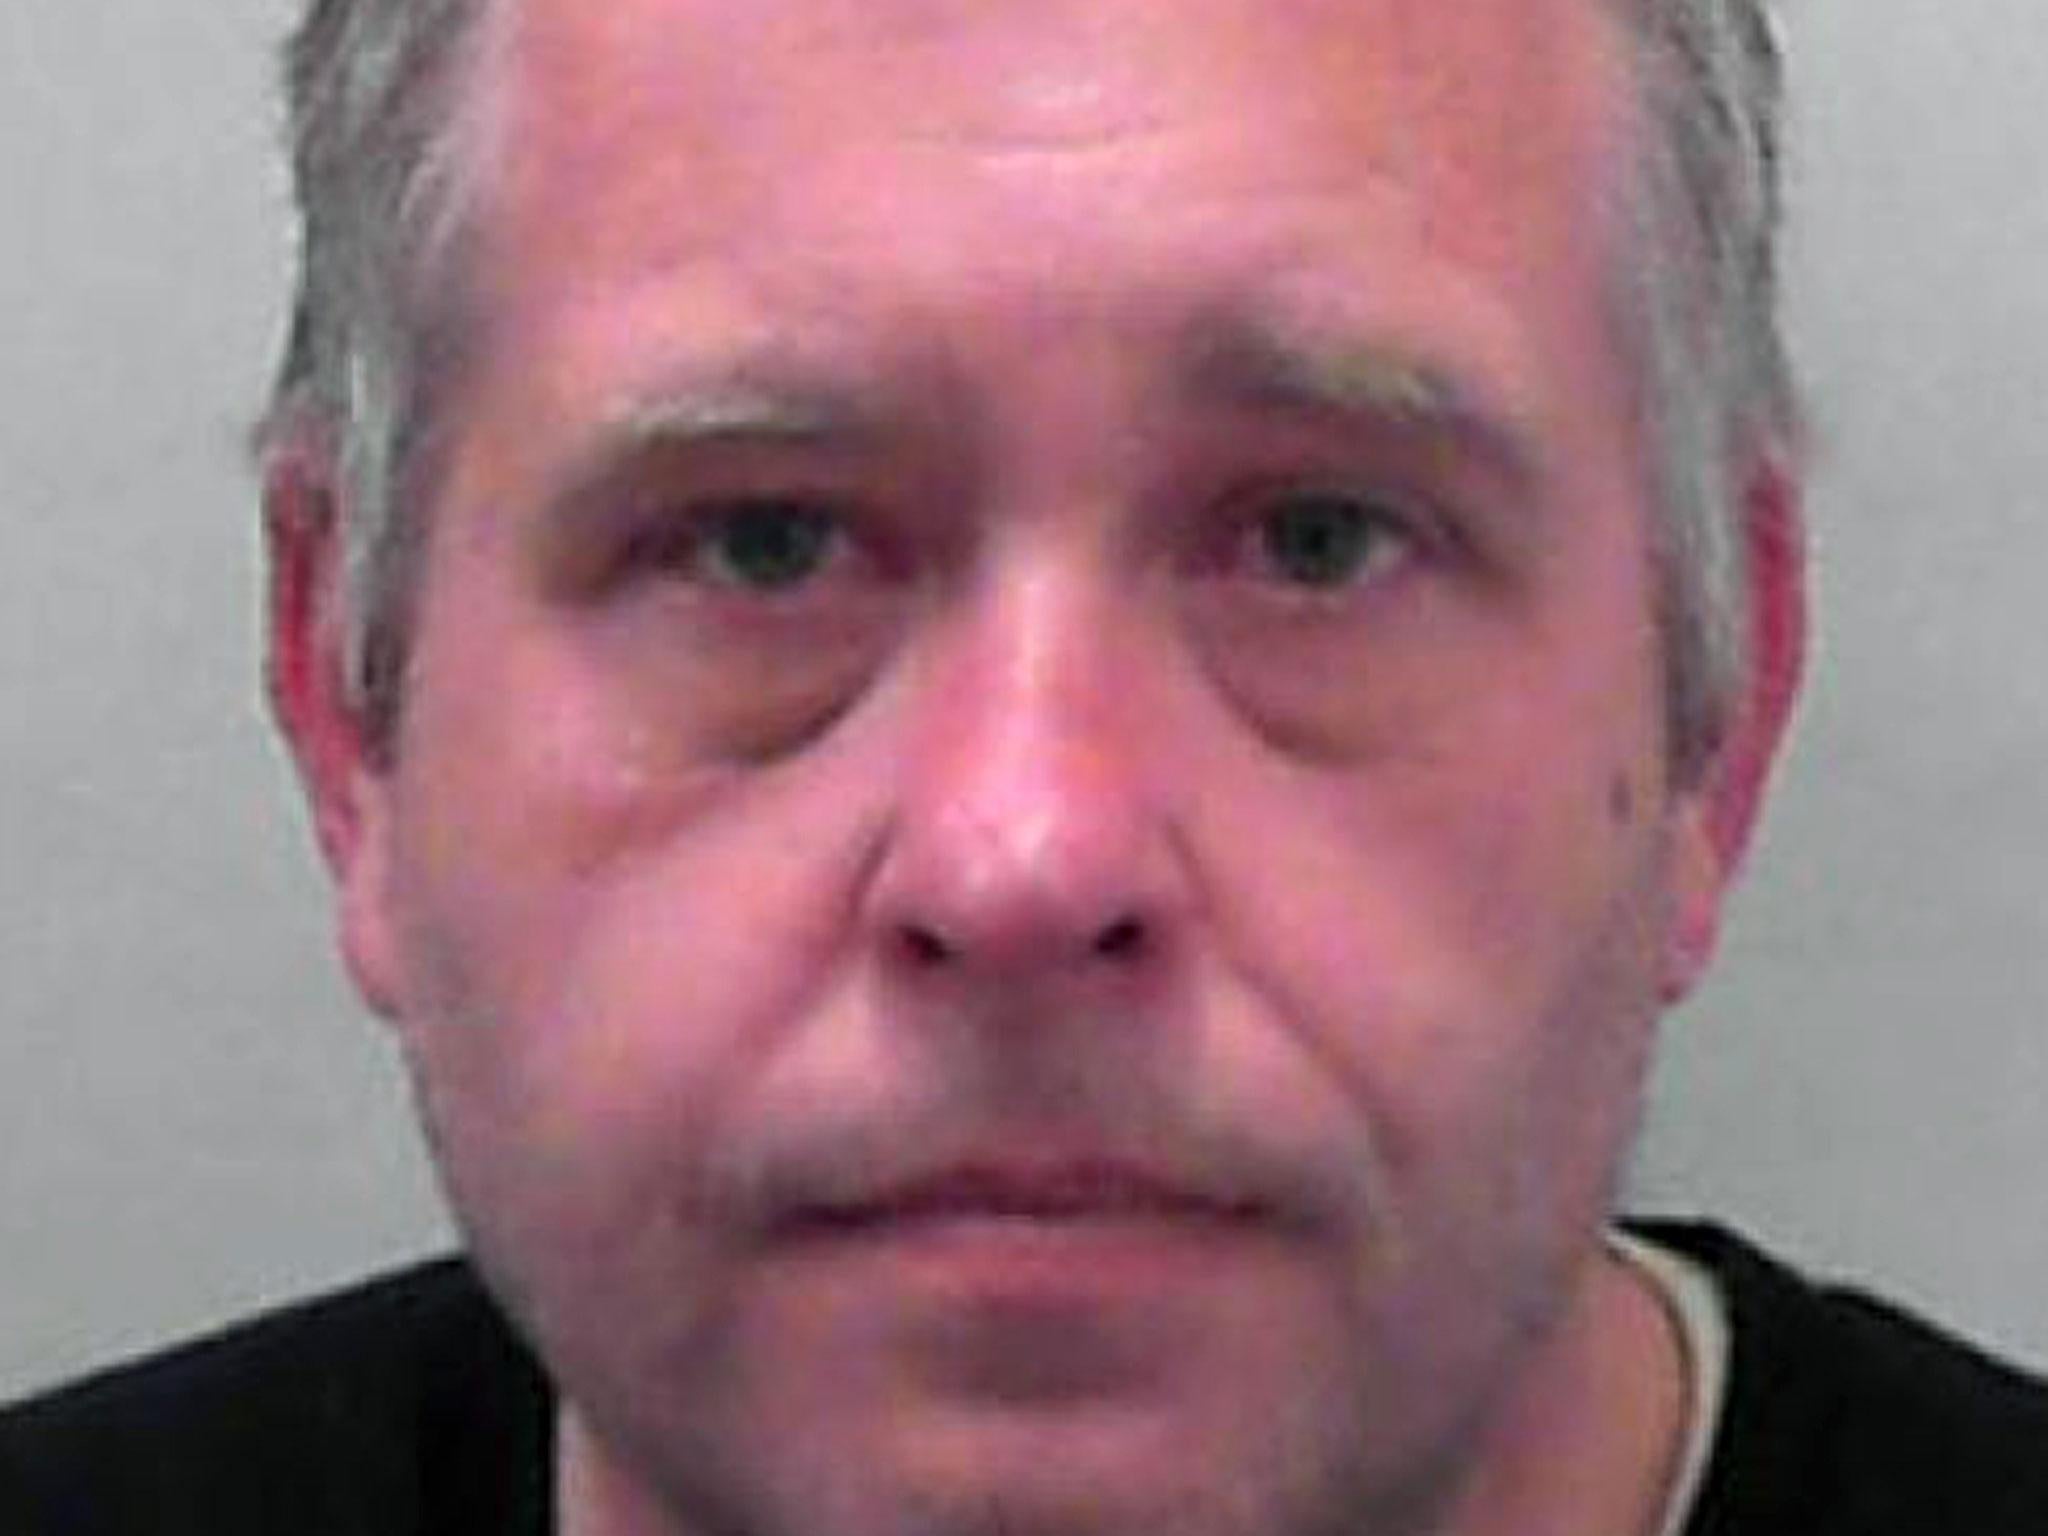 Wayne Brookes watched a live stream of a six-year-old boy being raped